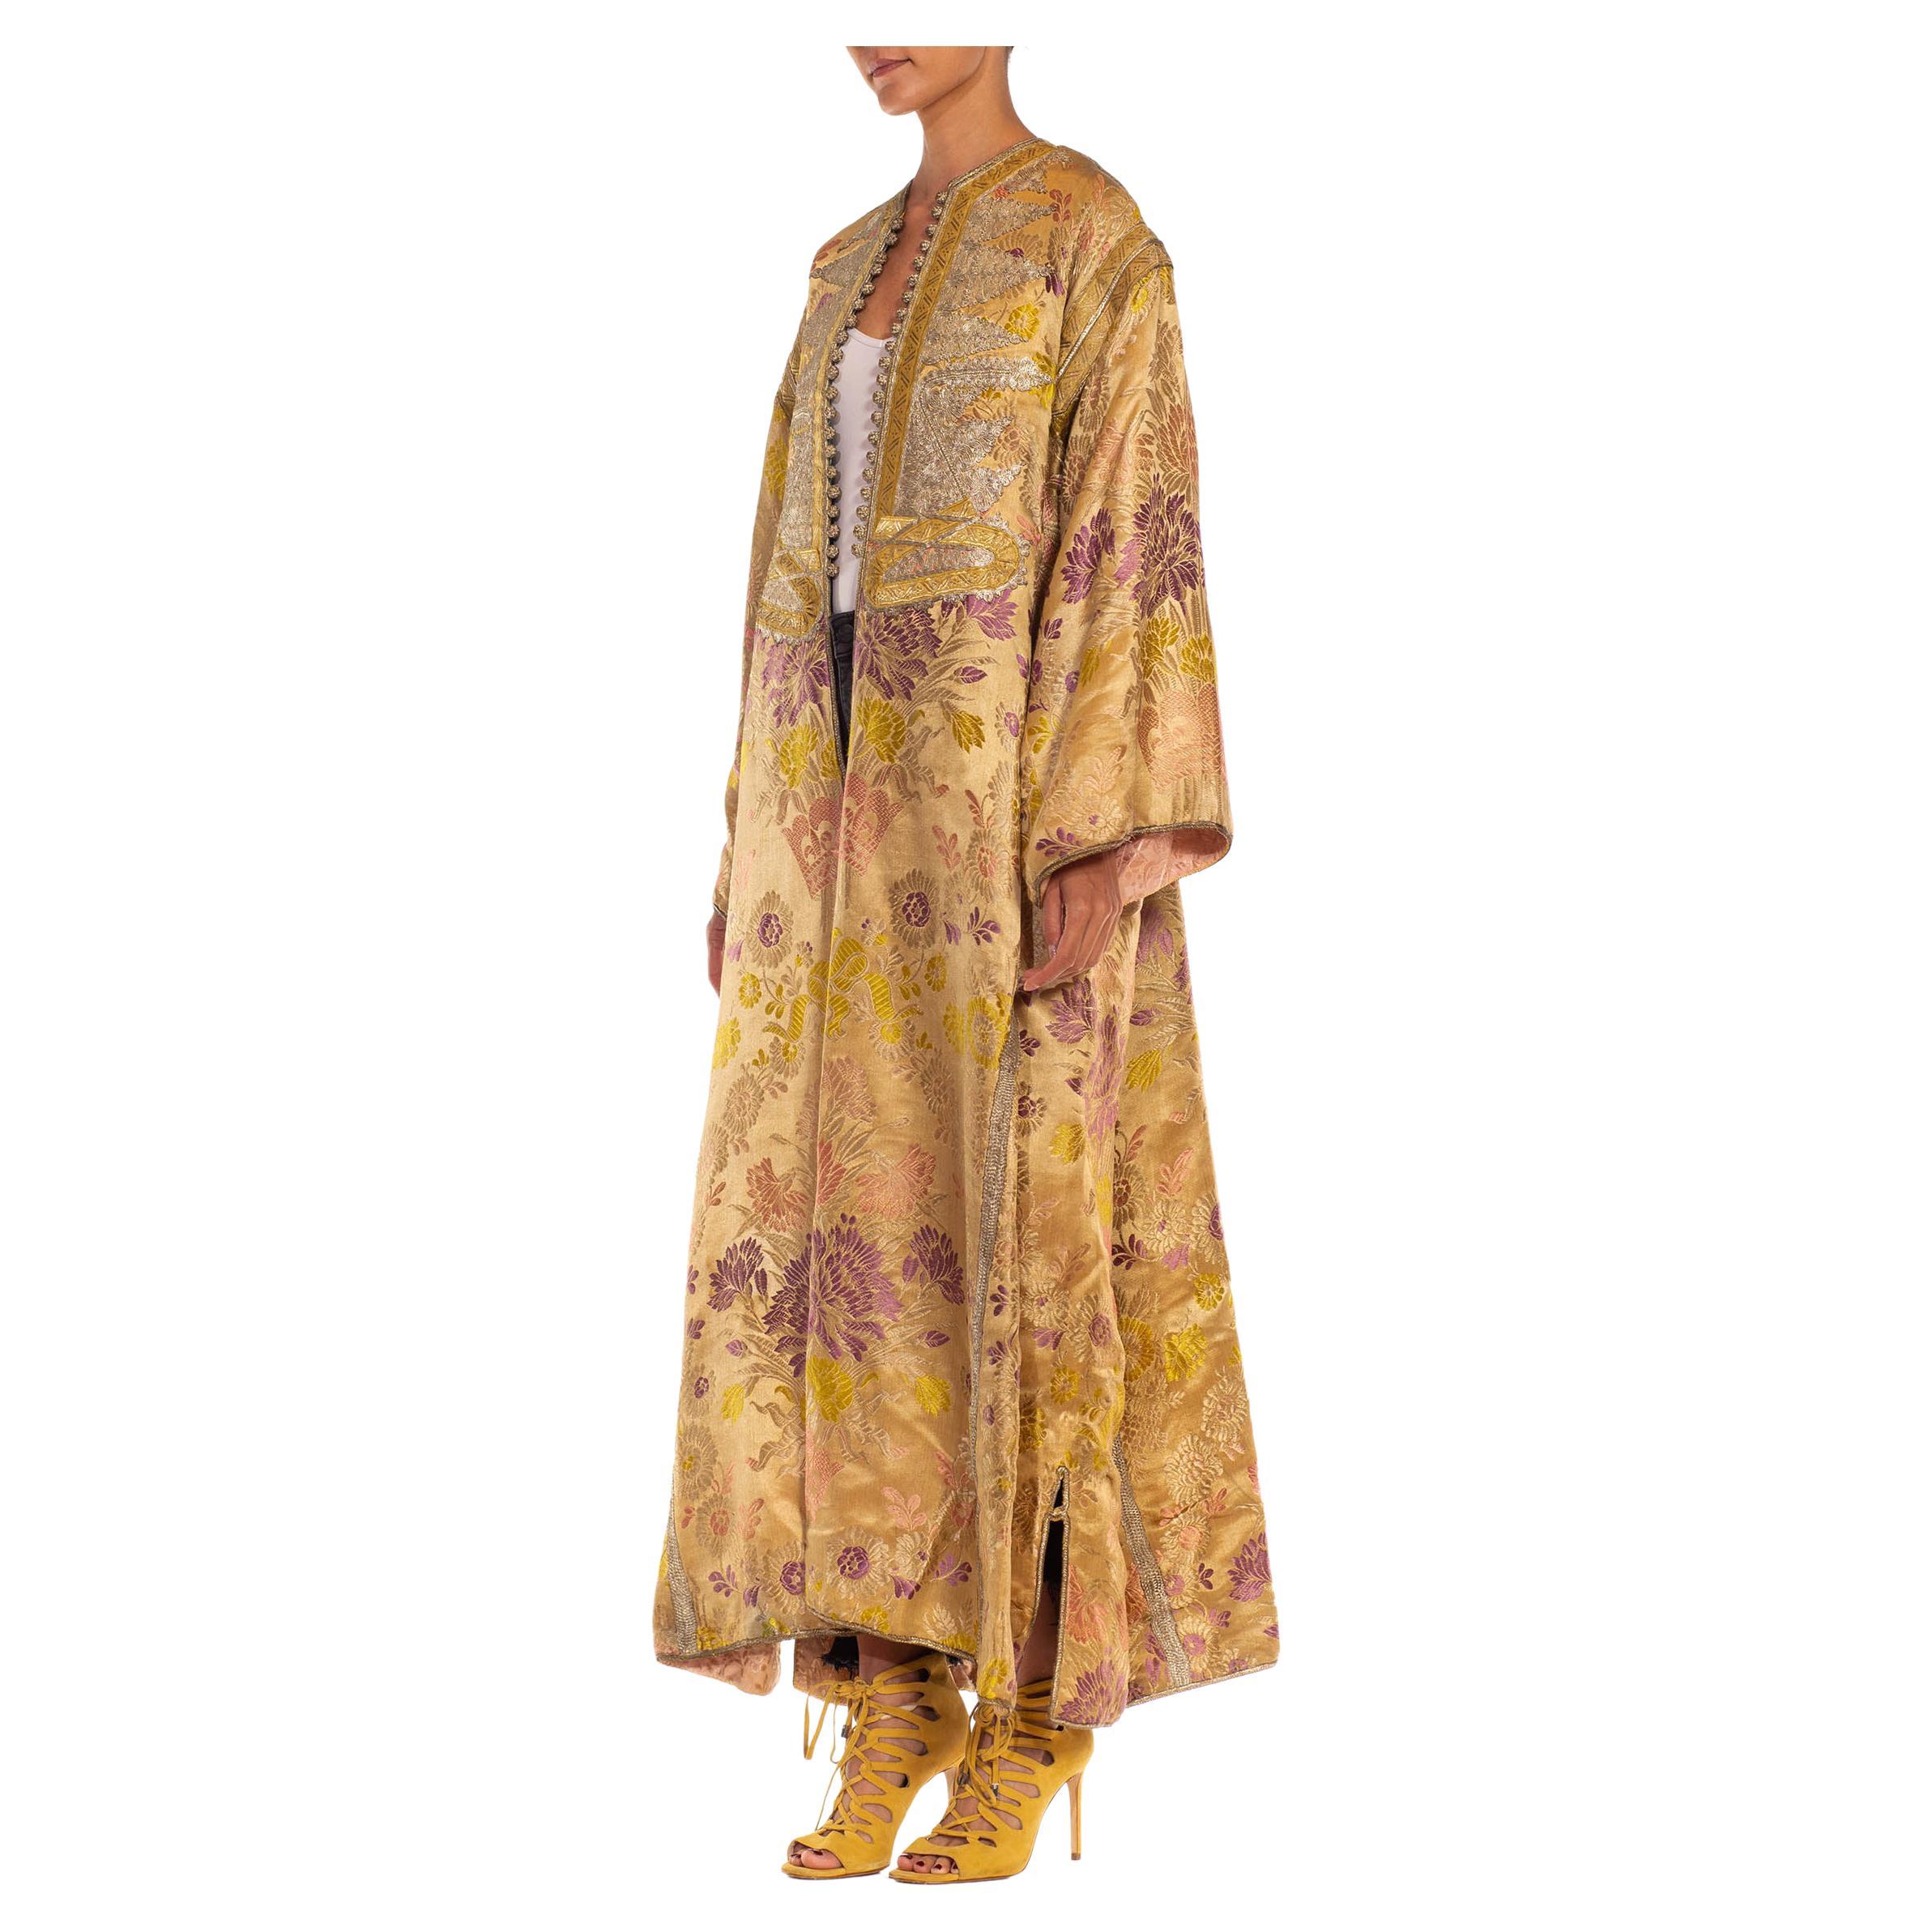 Victorian Gold & Silver Floral Embroidered Silk/Cotton Blend Moroccan Kaftan